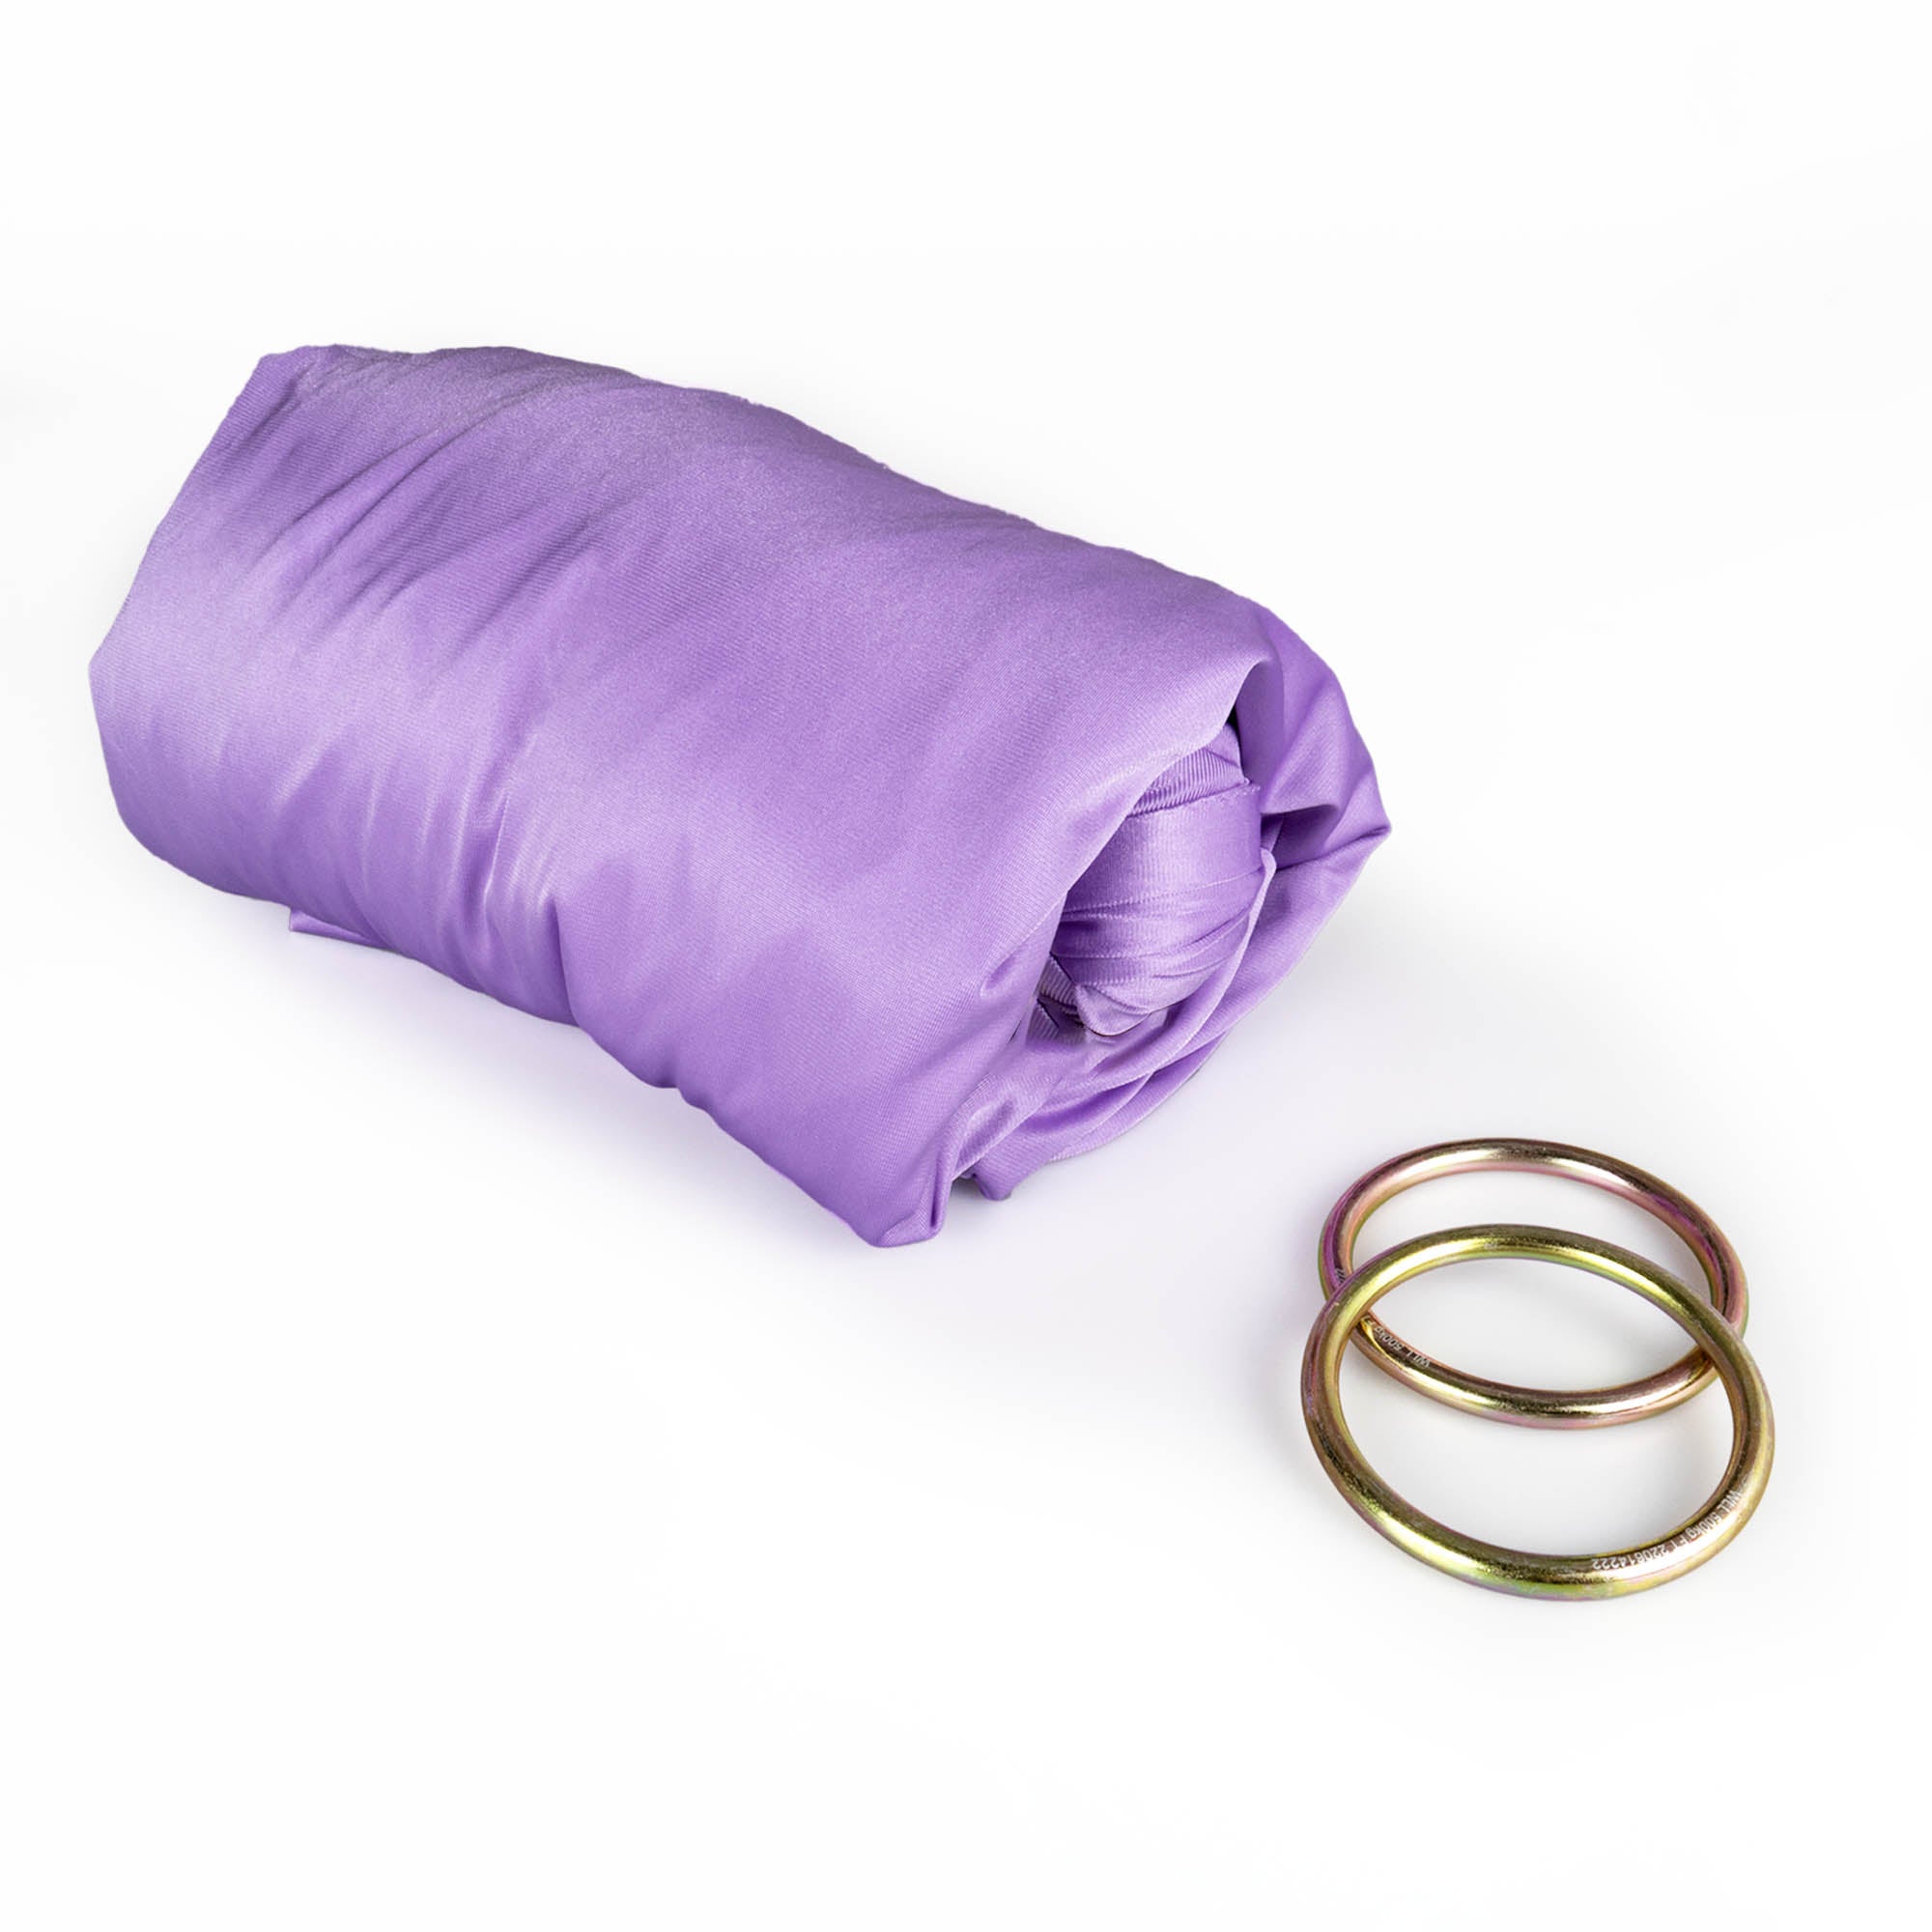 Lavender yoga hammock with O rings detached